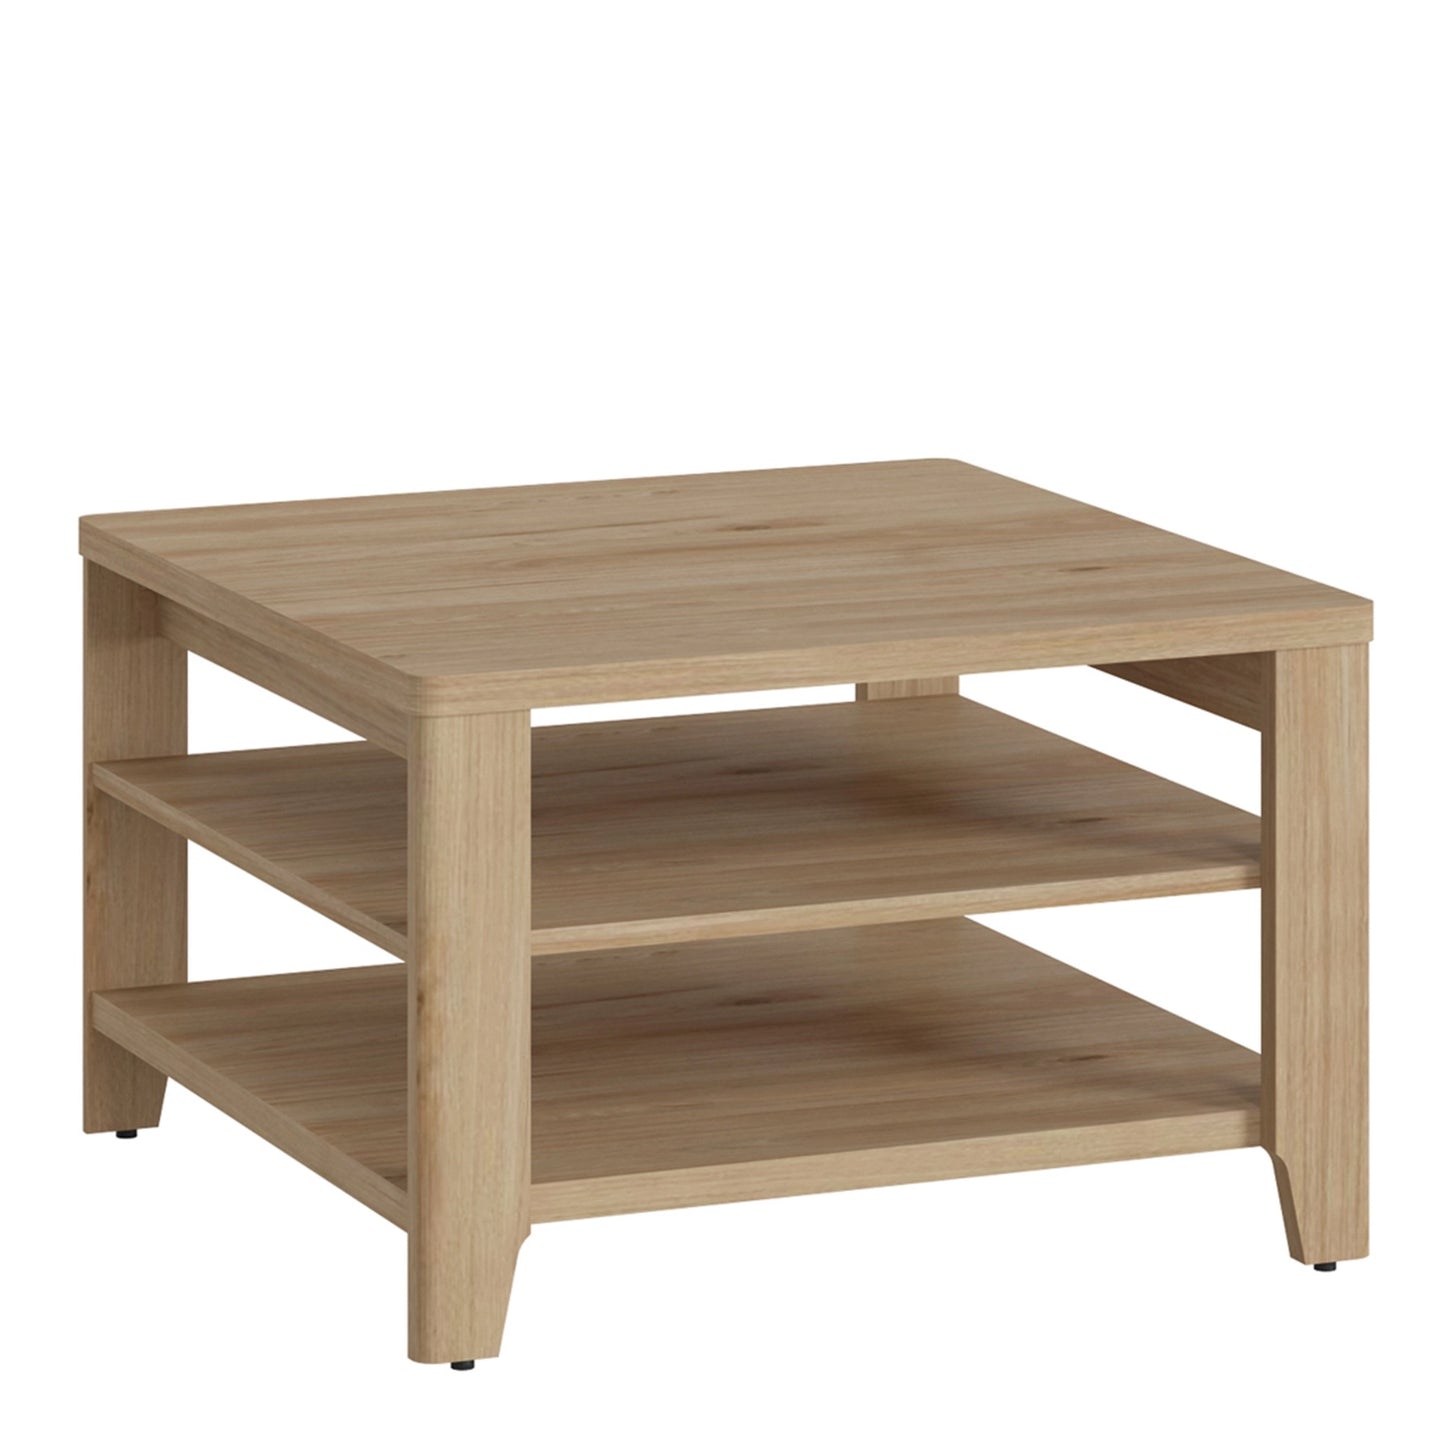 Furniture To Go Cestino Coffee Table in Jackson Hickory Oak Effect